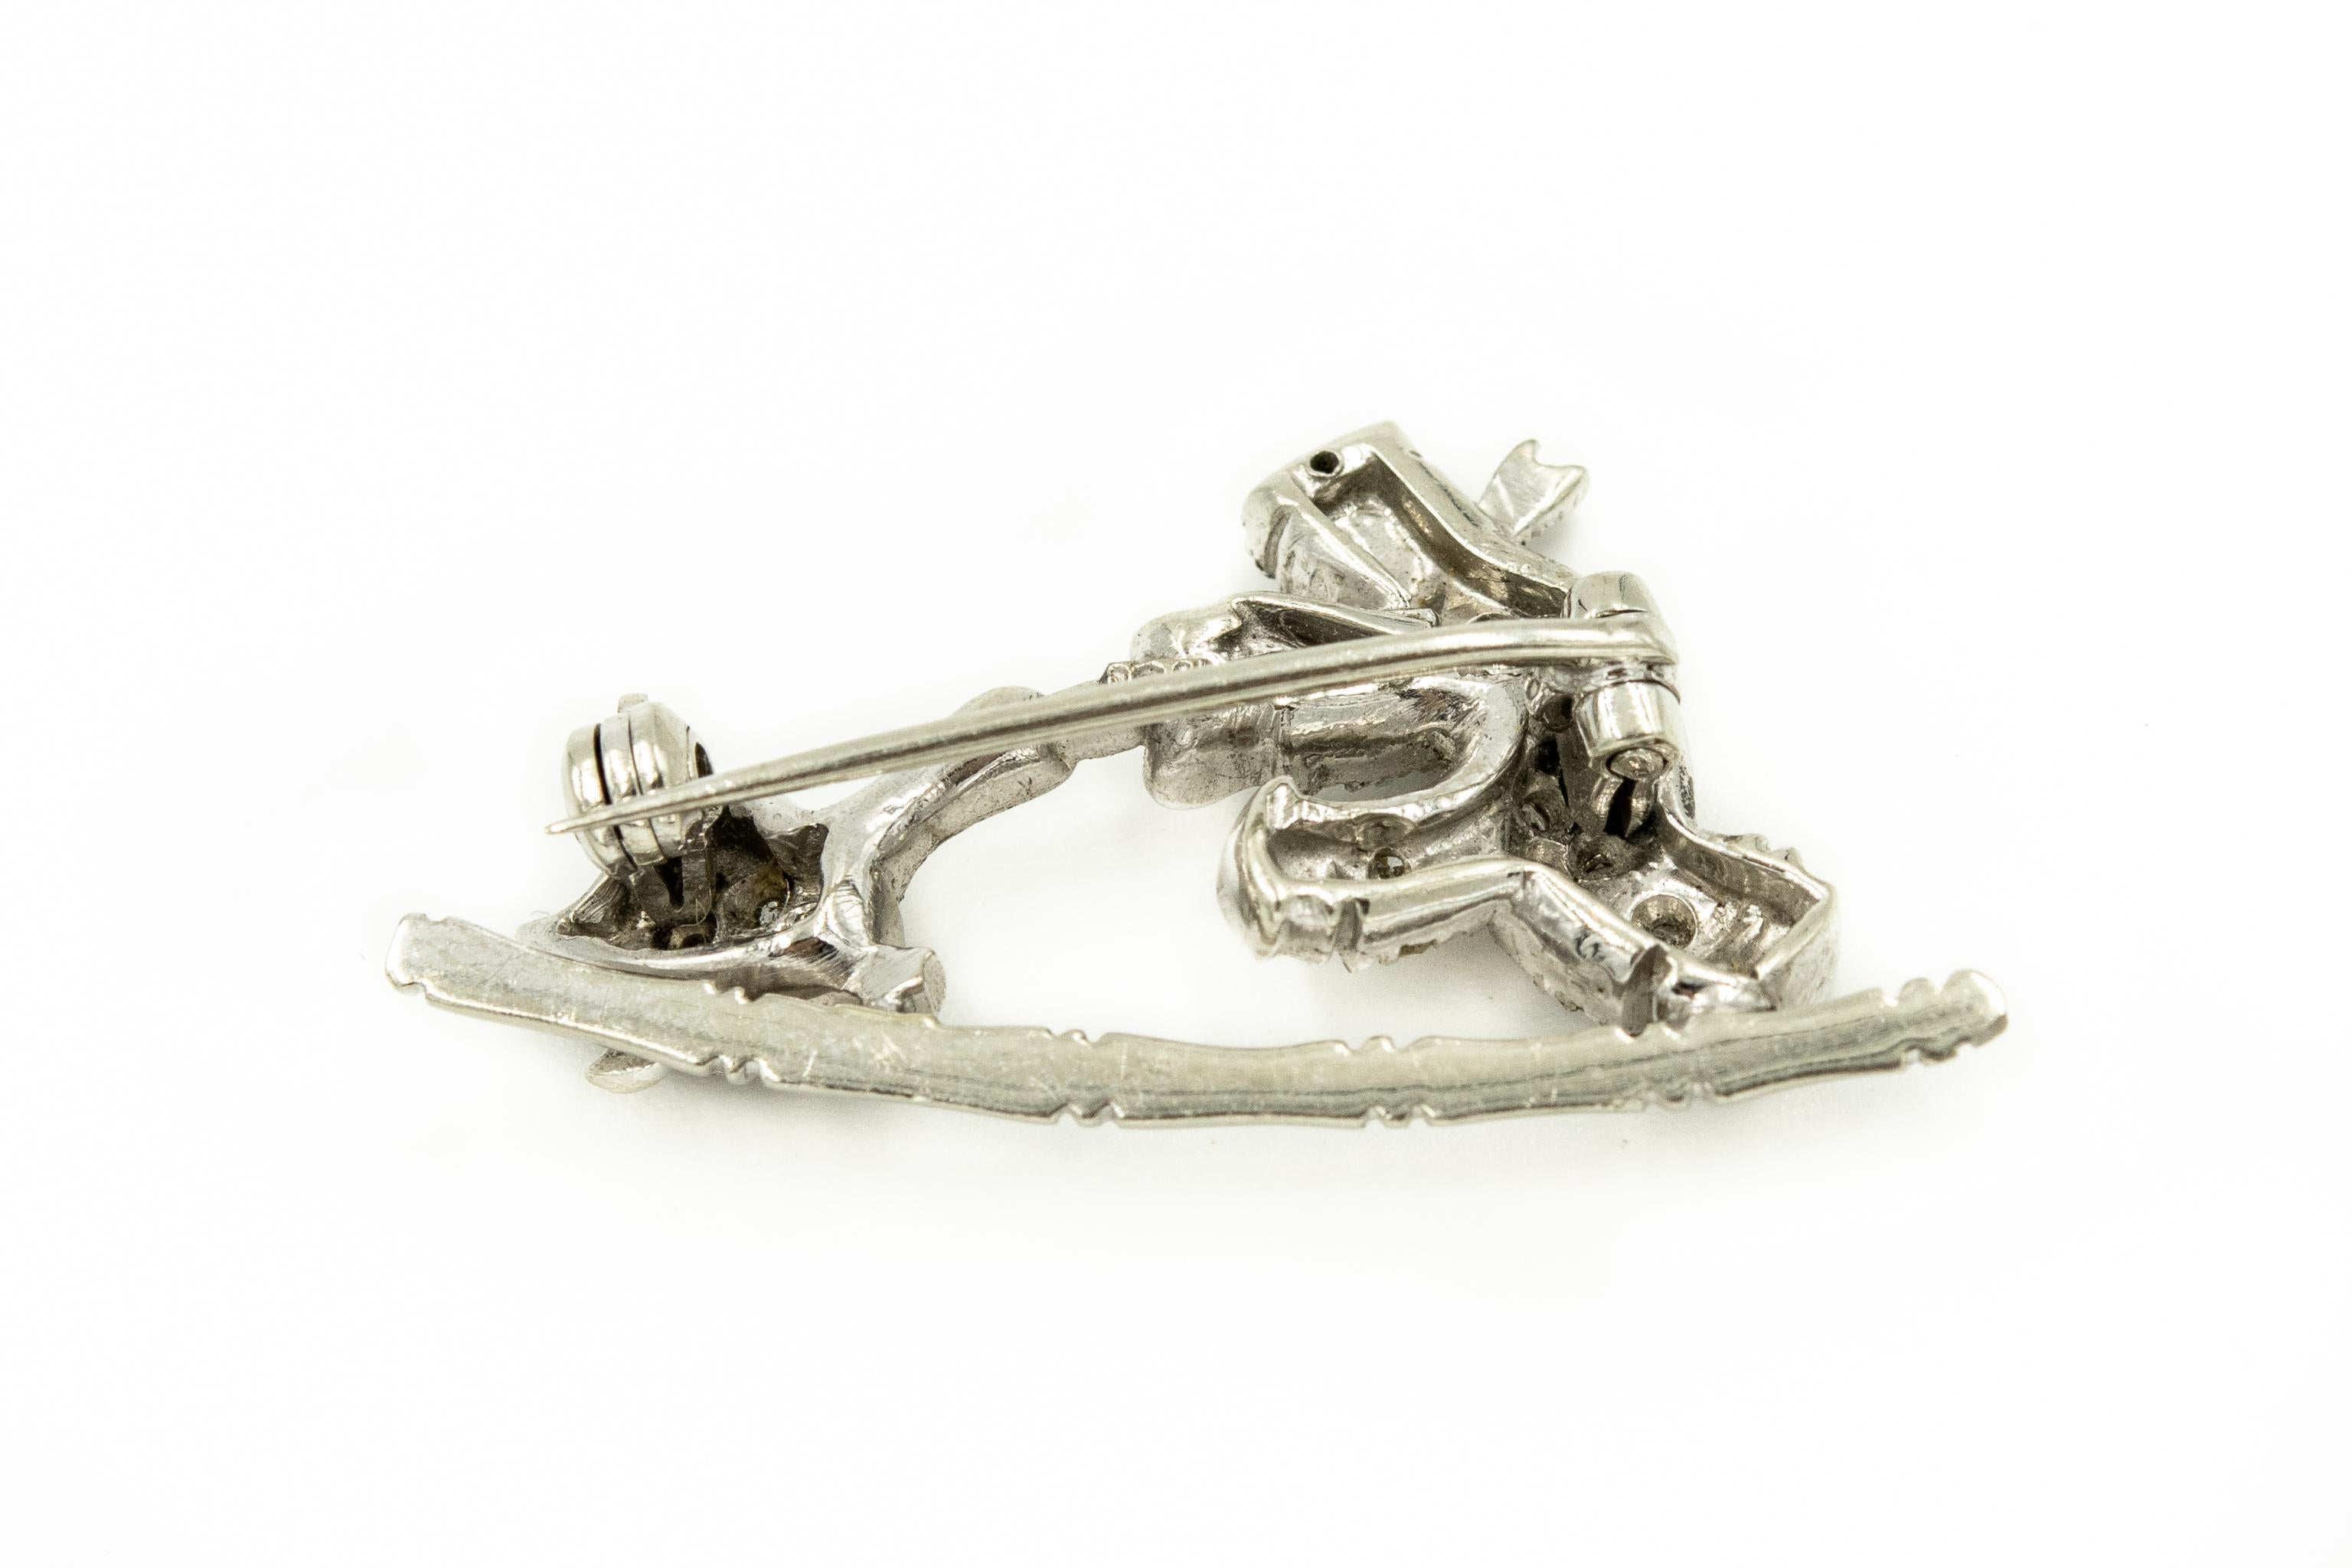 Whimsical 18k white gold brooch featuring a Dutch boy playing with a goose.